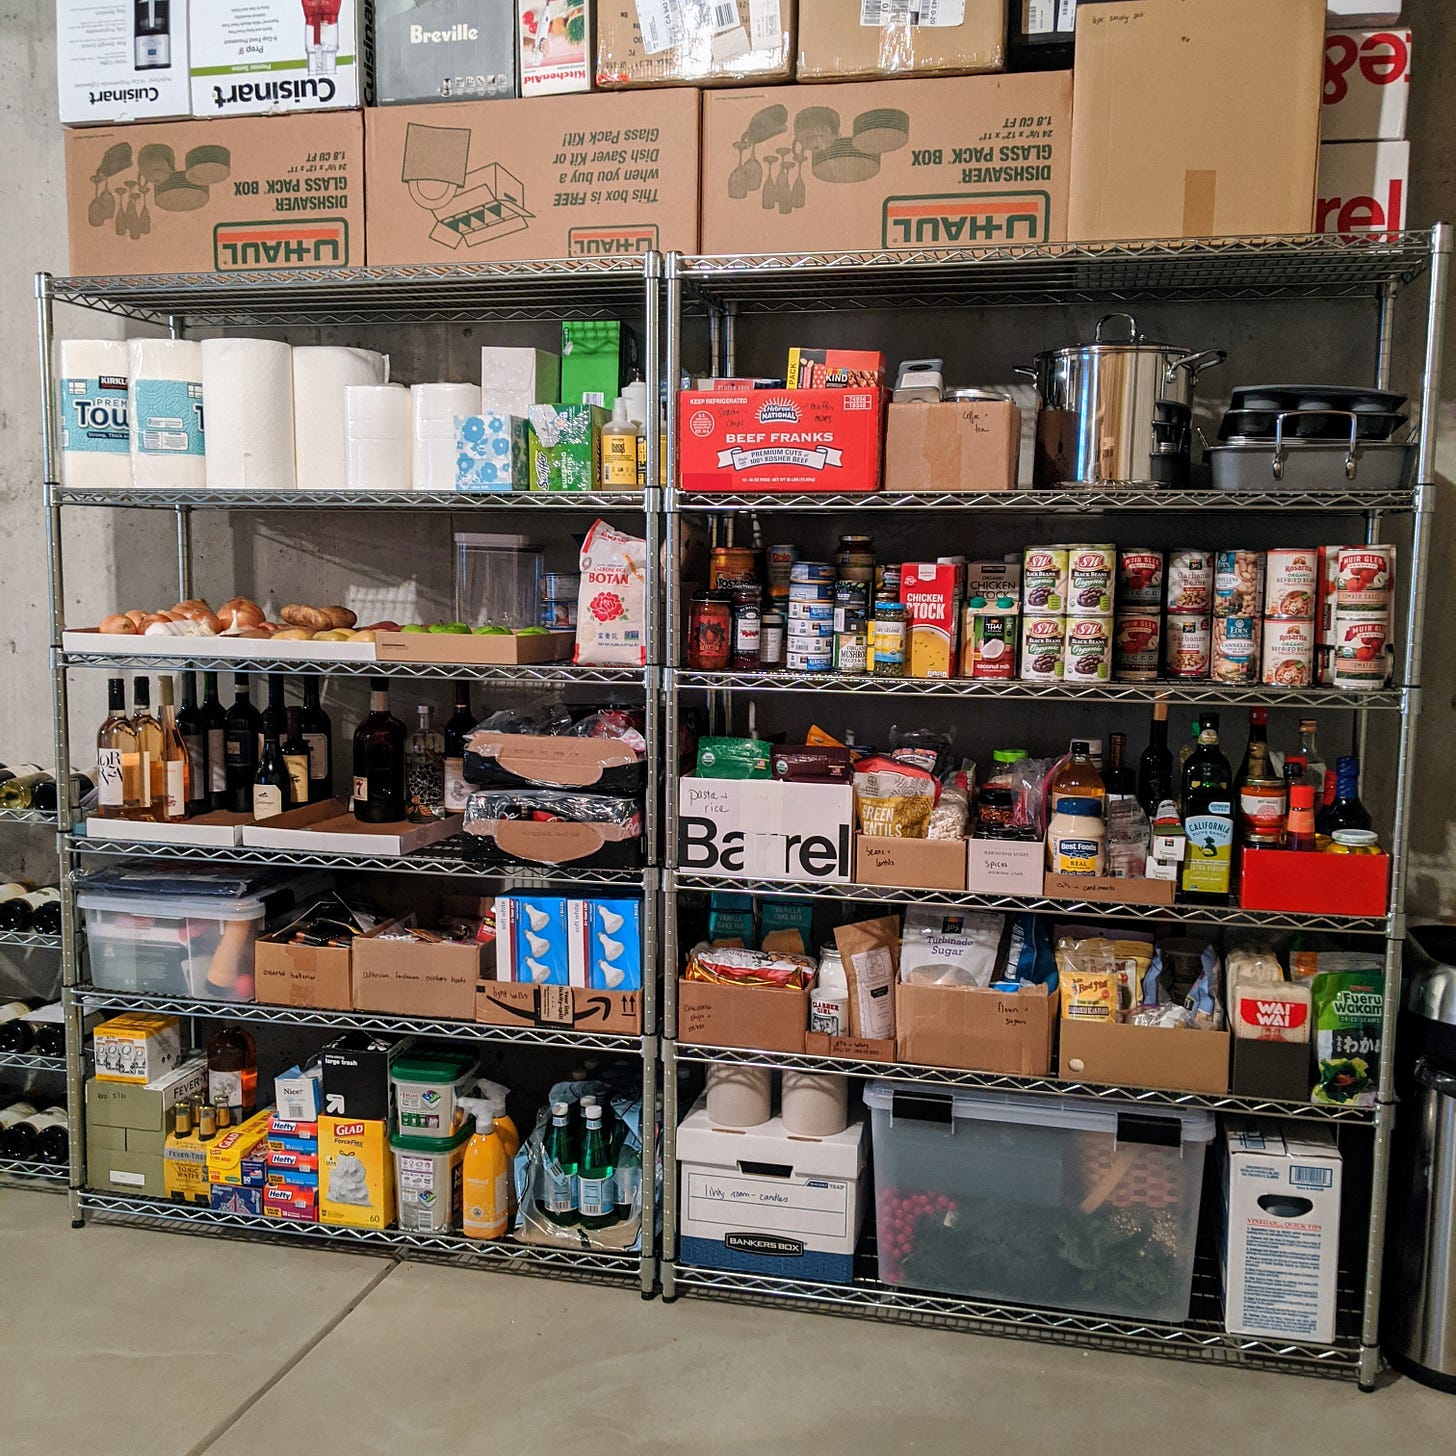 Two tall shelving units with cans of beans, tuna, tomatoes, bottles of wine, etc.